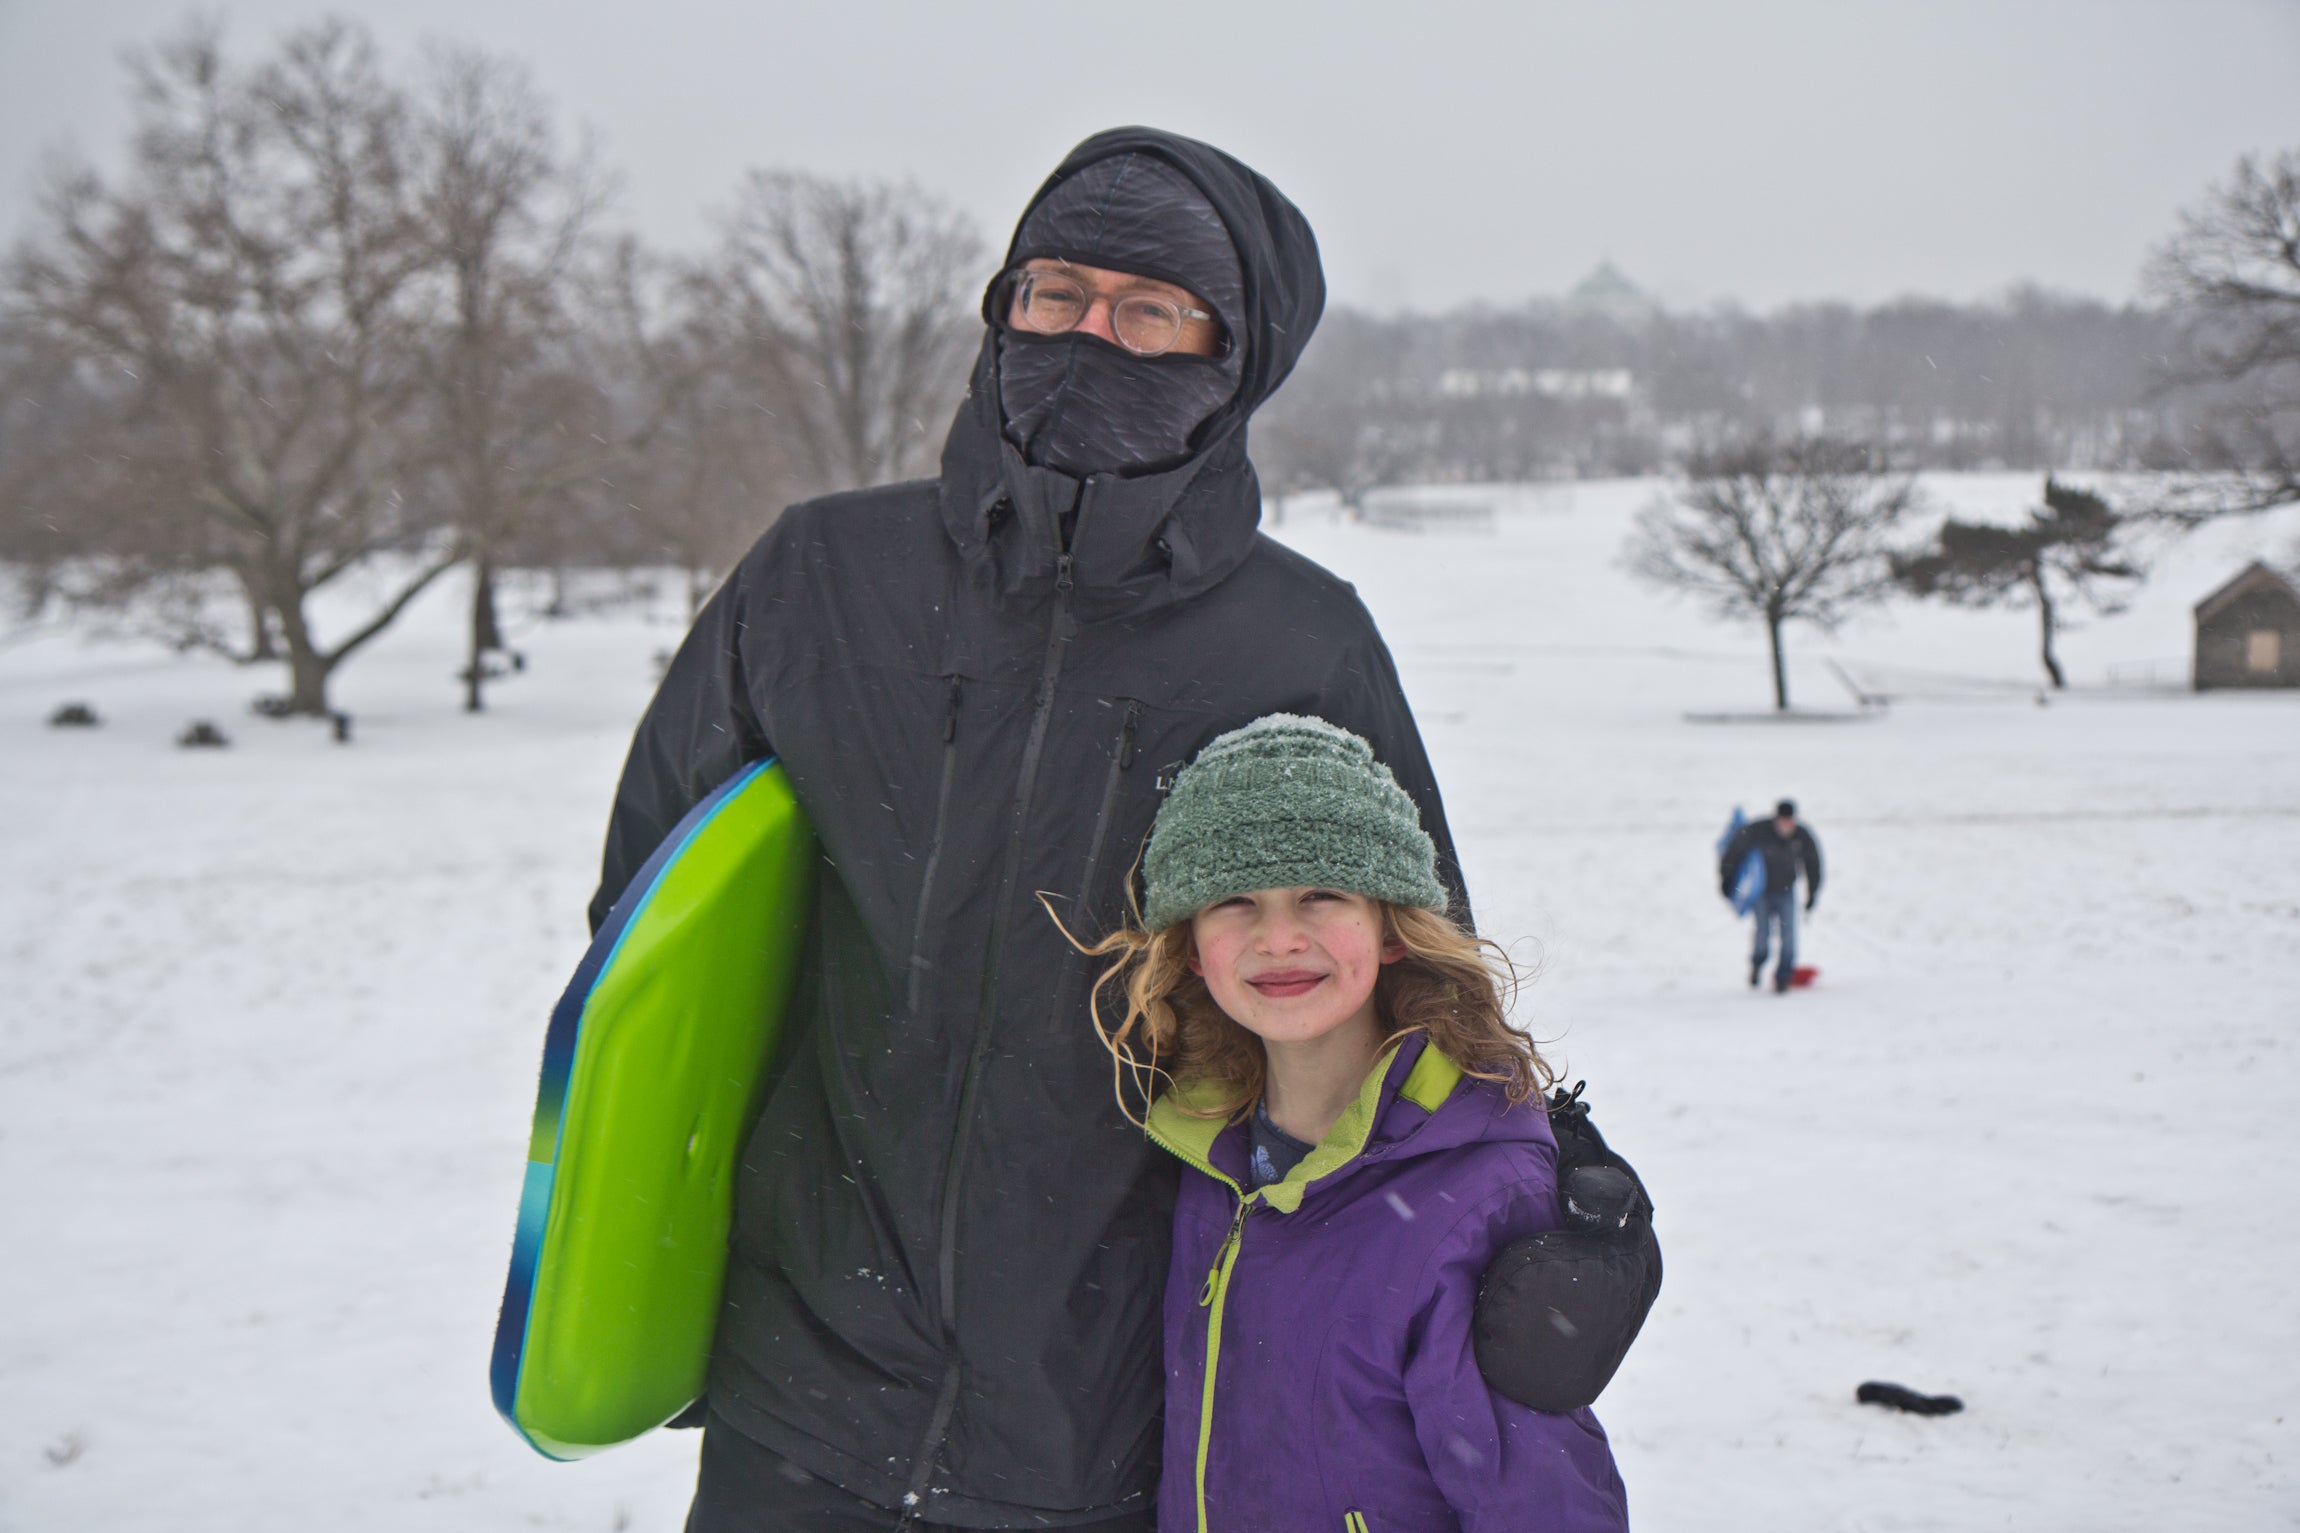 David Zarin and his daughter Phoebe sled in Fairmount Park